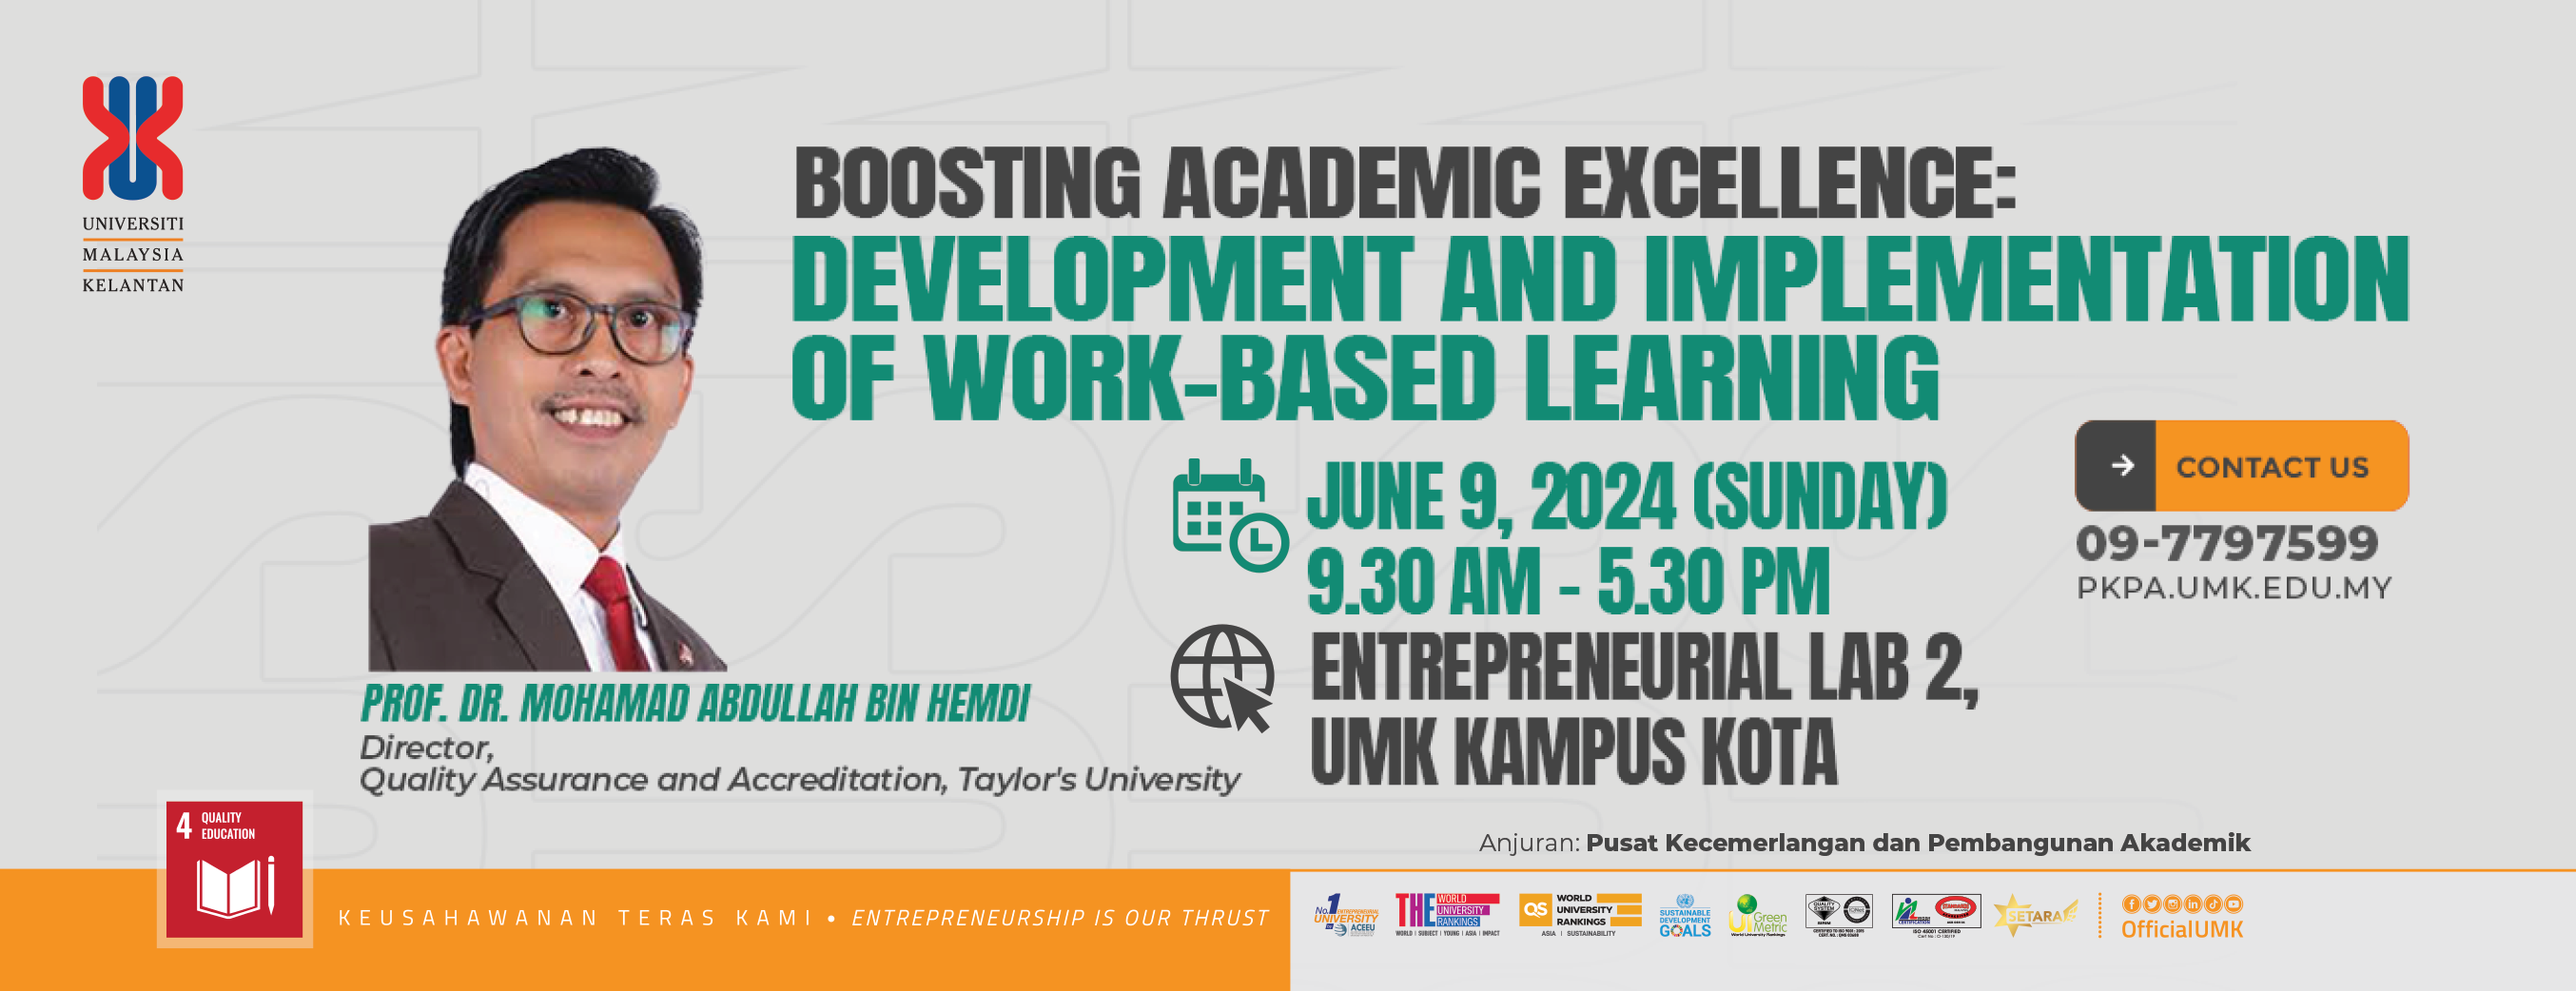 Boosting Academic Excellence: Development and Implementation of Work-Based Learning